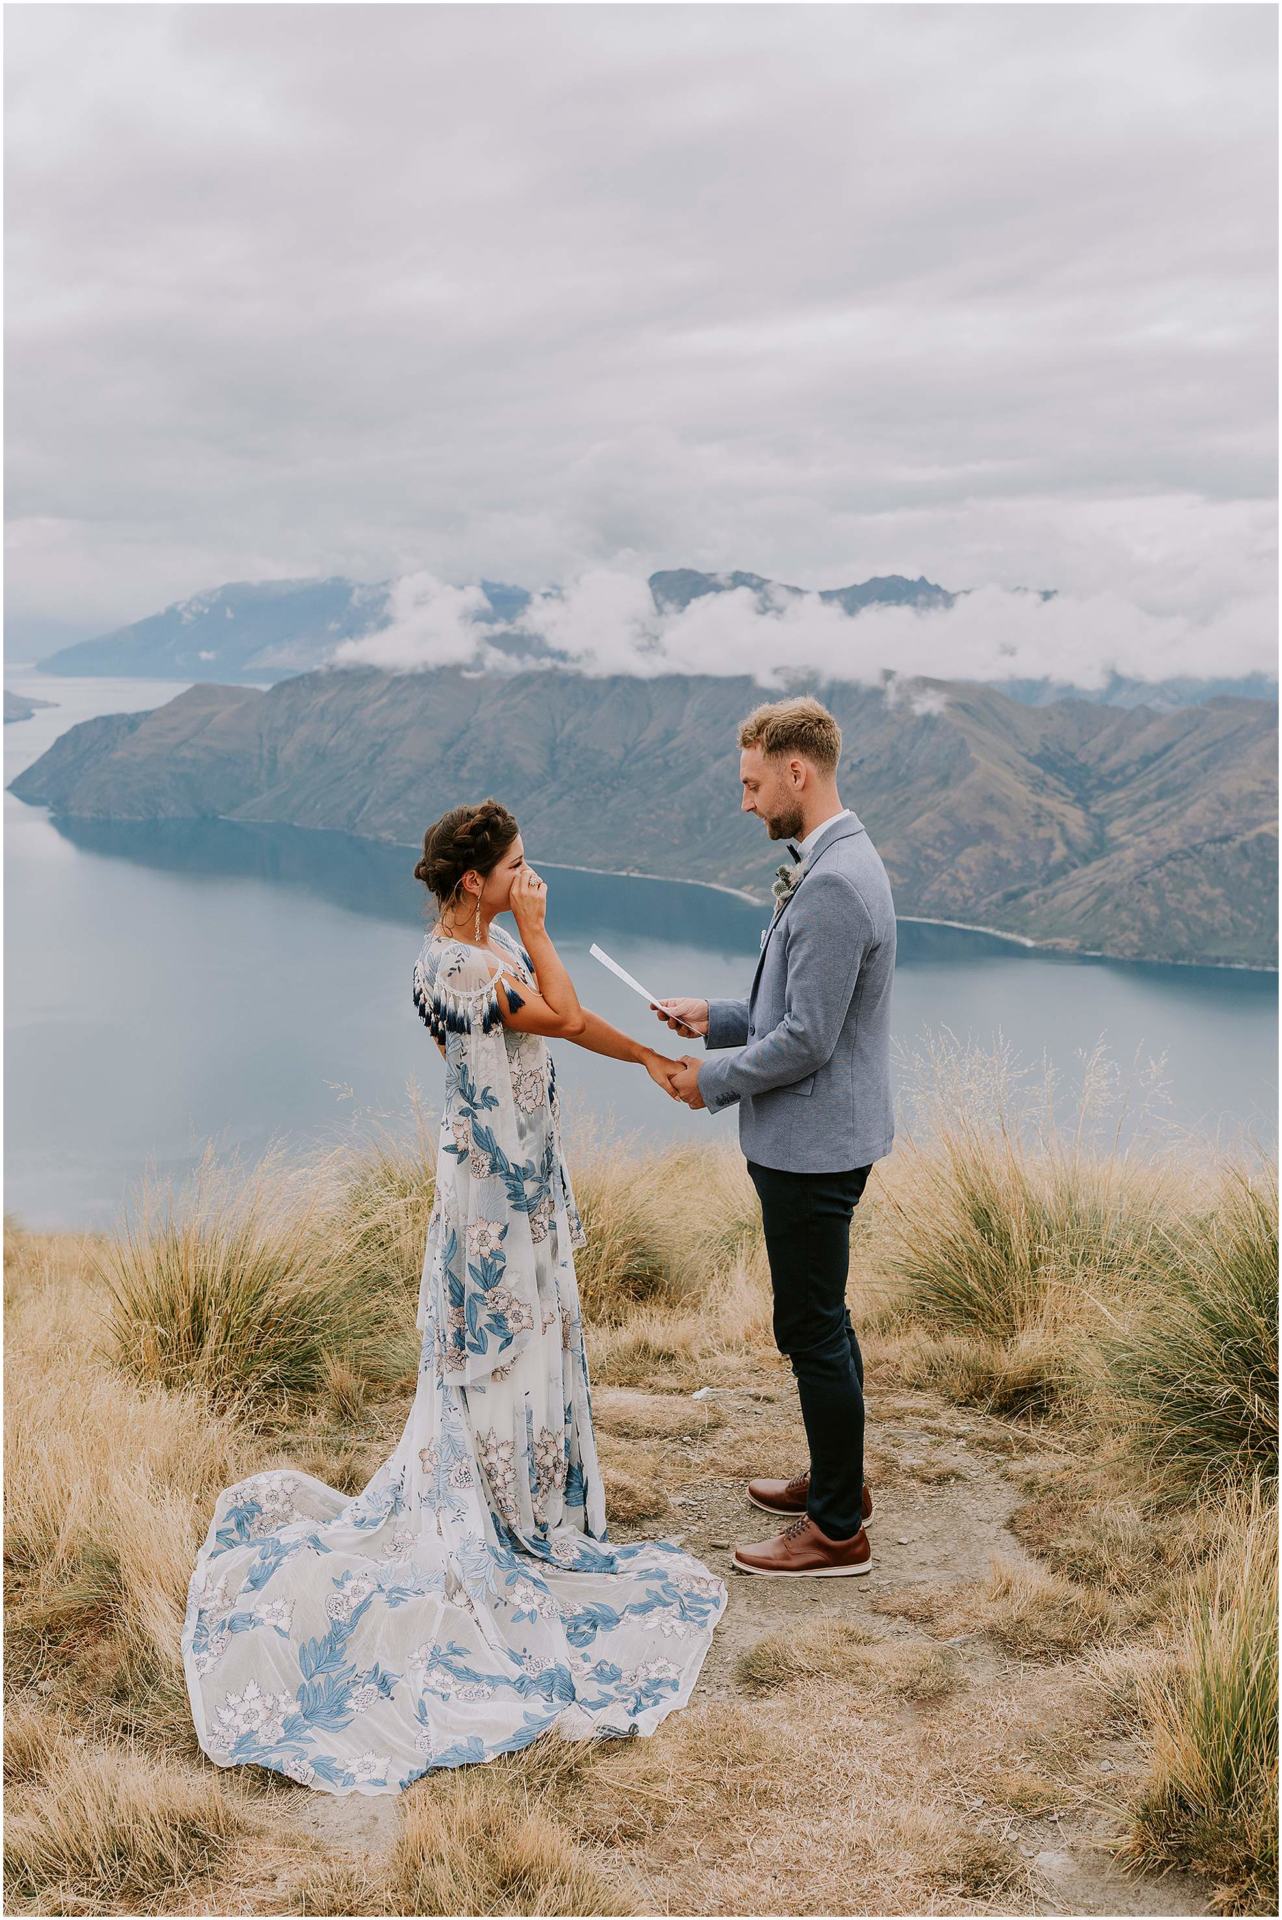 Charlotte Kiri Photography - elopement photography with the groom reading vows to his emotional bride on top of Roy's Peak, which overlooks a beautiful lake and mountain view in Wanaka, New Zealand